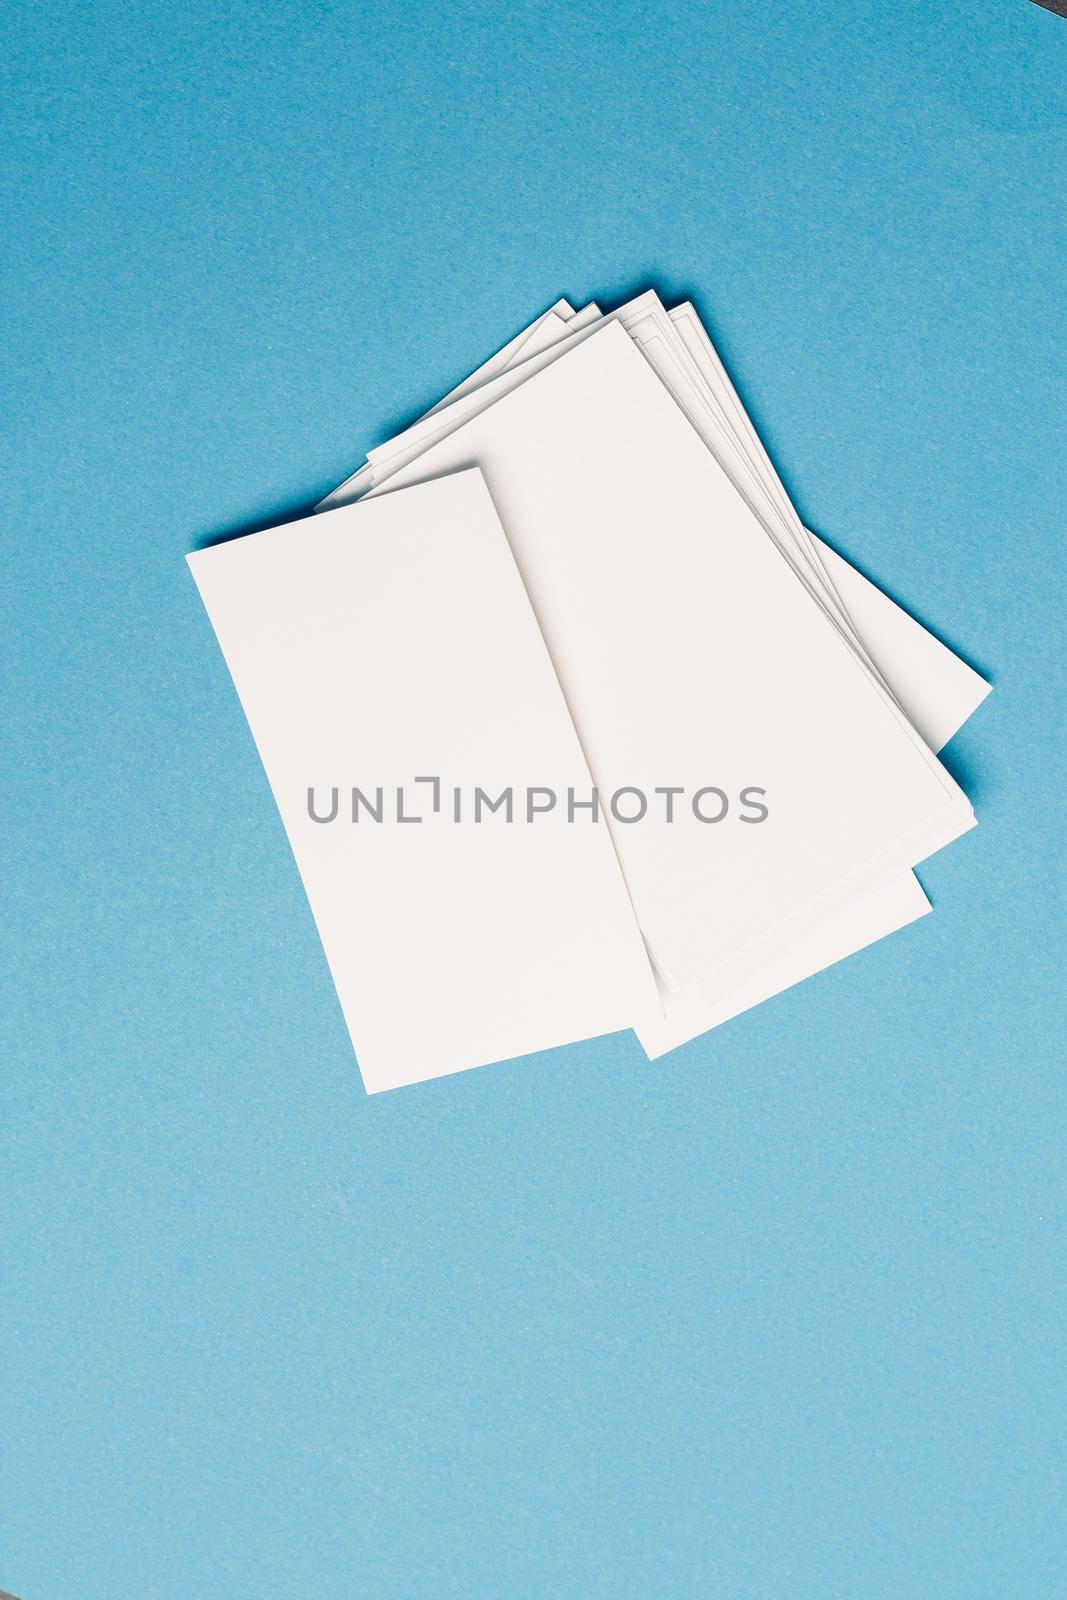 white business cards in the office on blue glass top view mockup. High quality photo